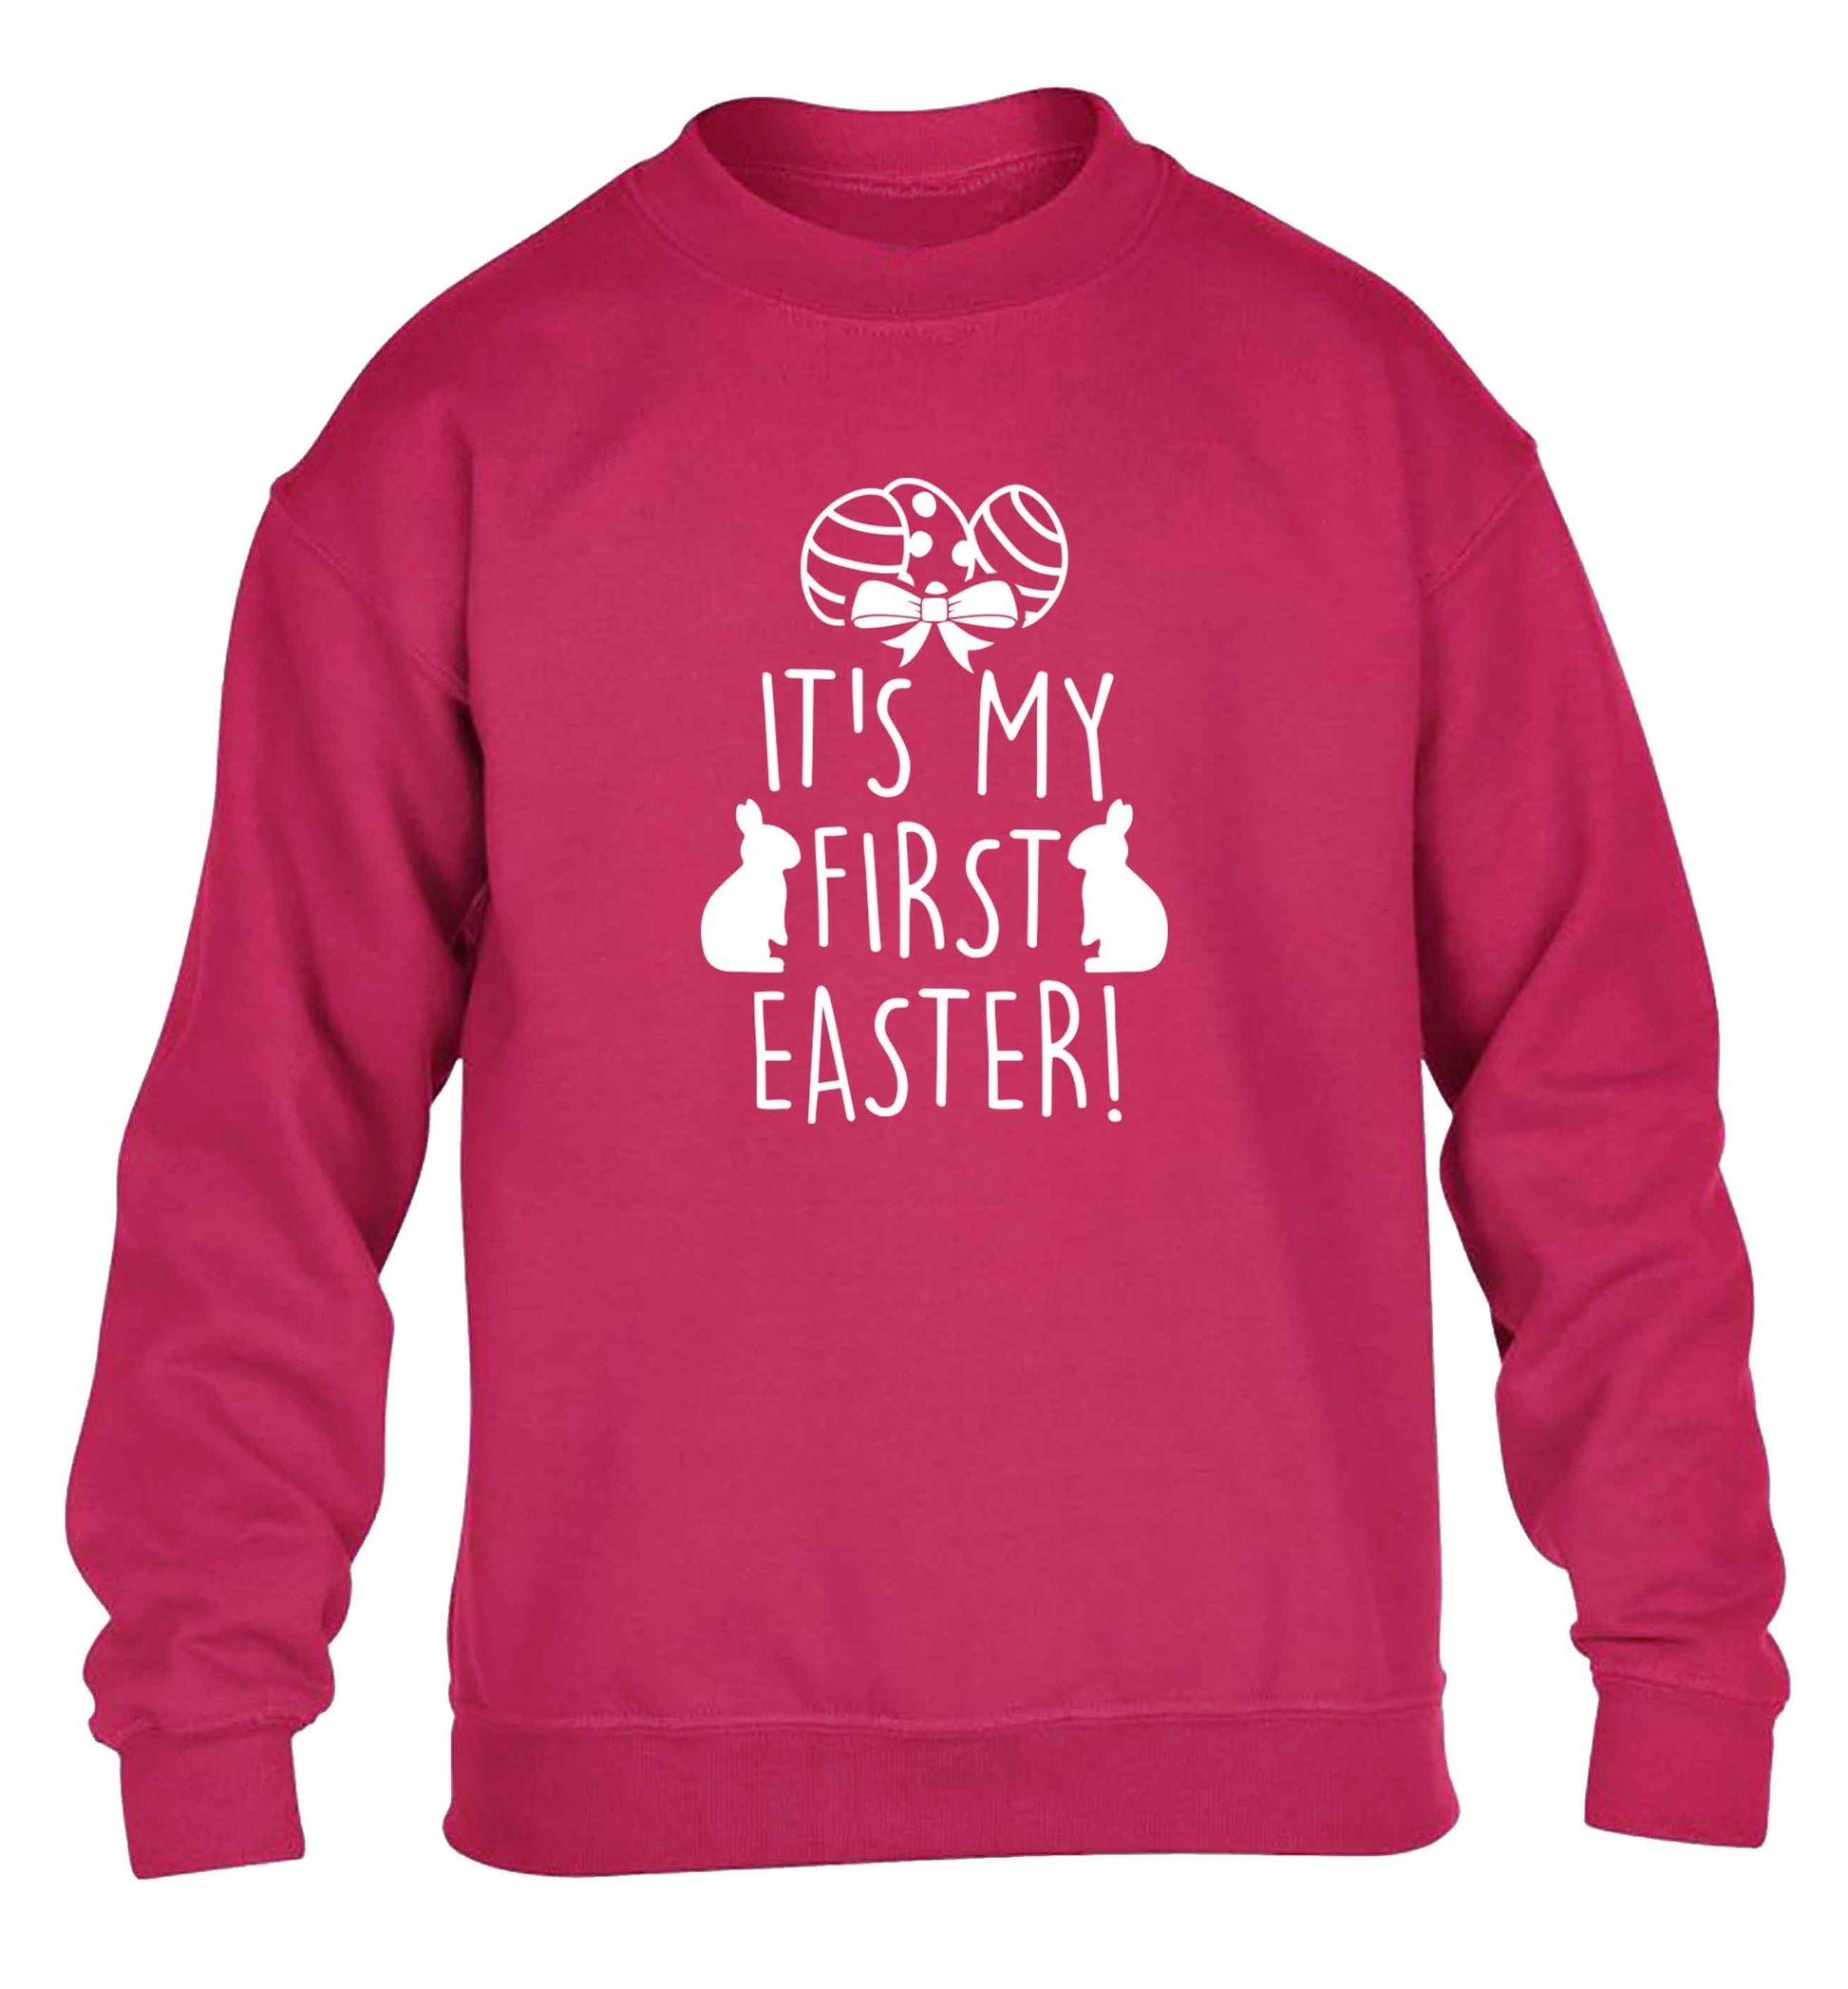 It's my first Easter children's pink sweater 12-13 Years